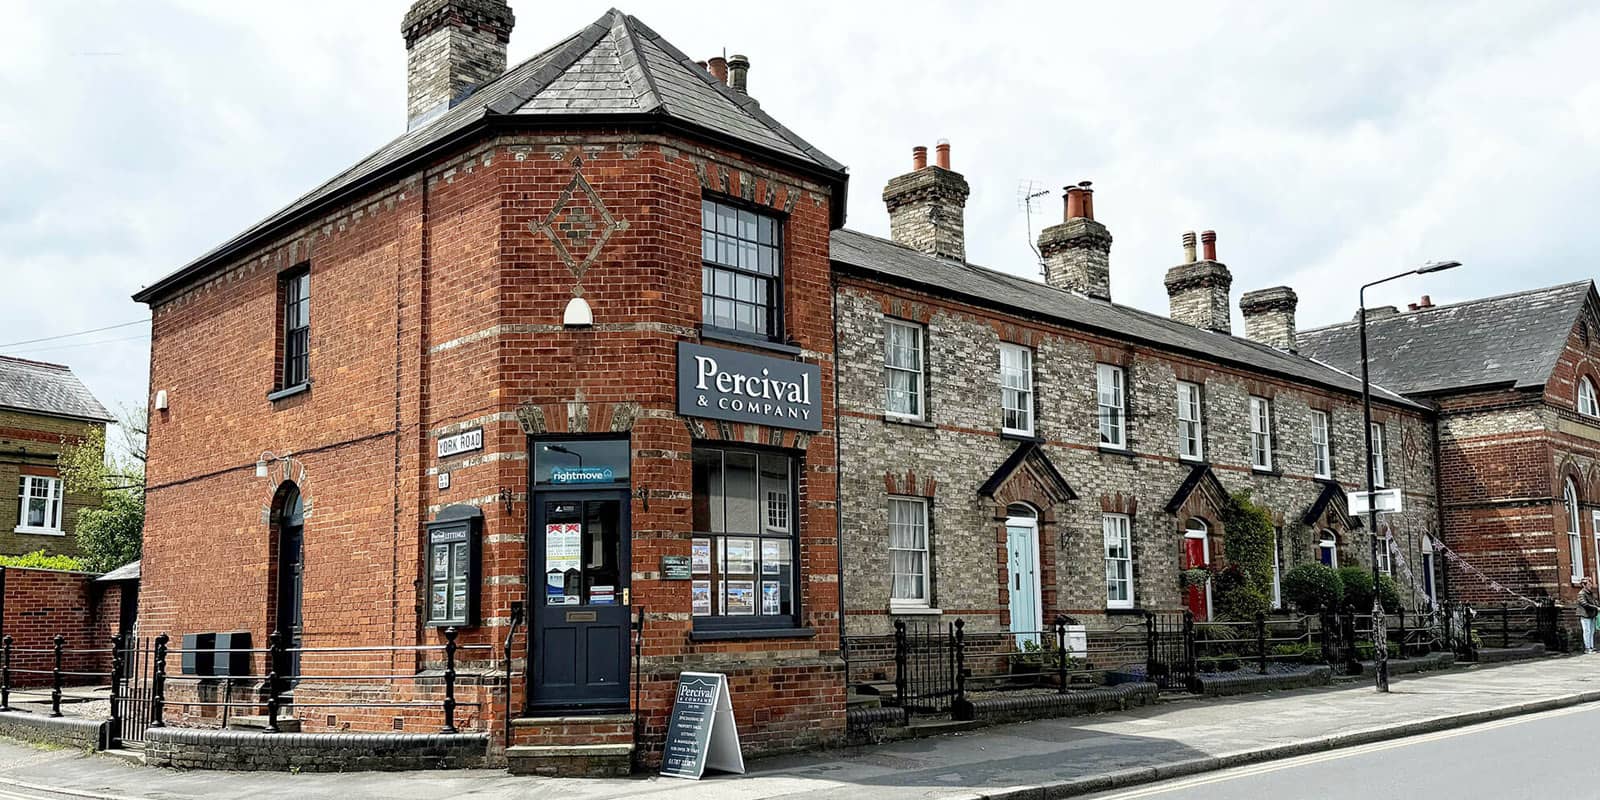 Percival & Company Offices on Earls Colne High Street